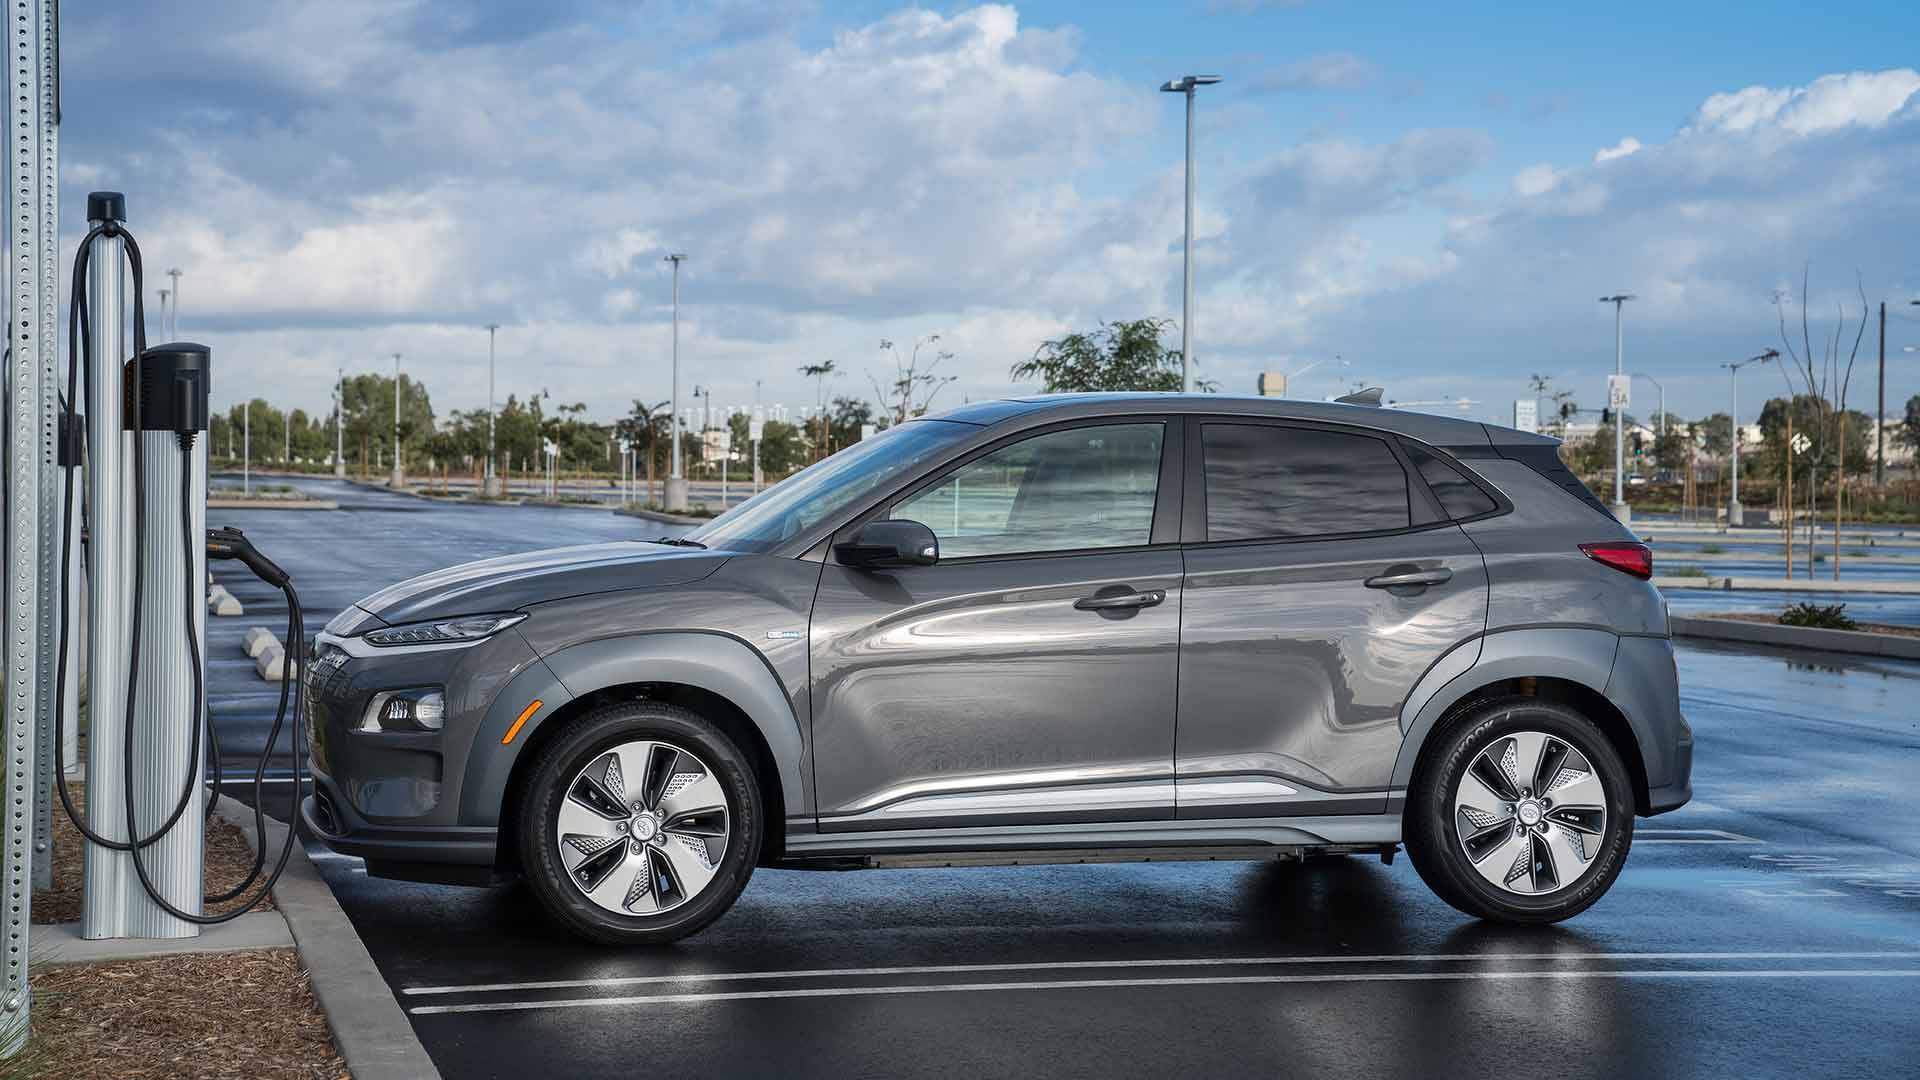 VWVortex.com Kona Electric crossover unveiled with two